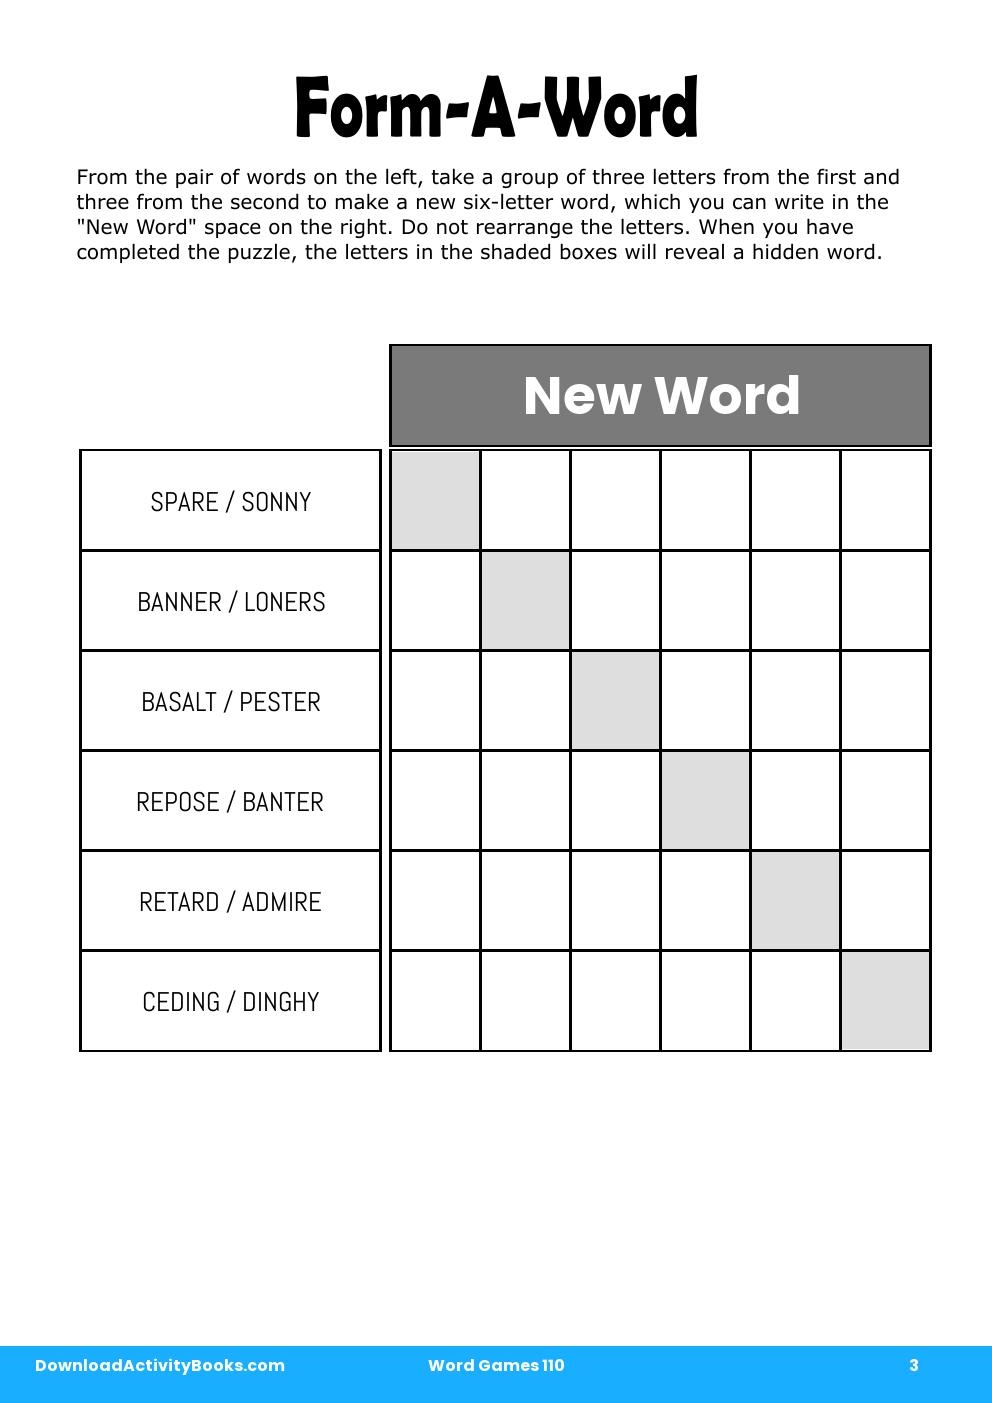 Form-A-Word in Word Games 110